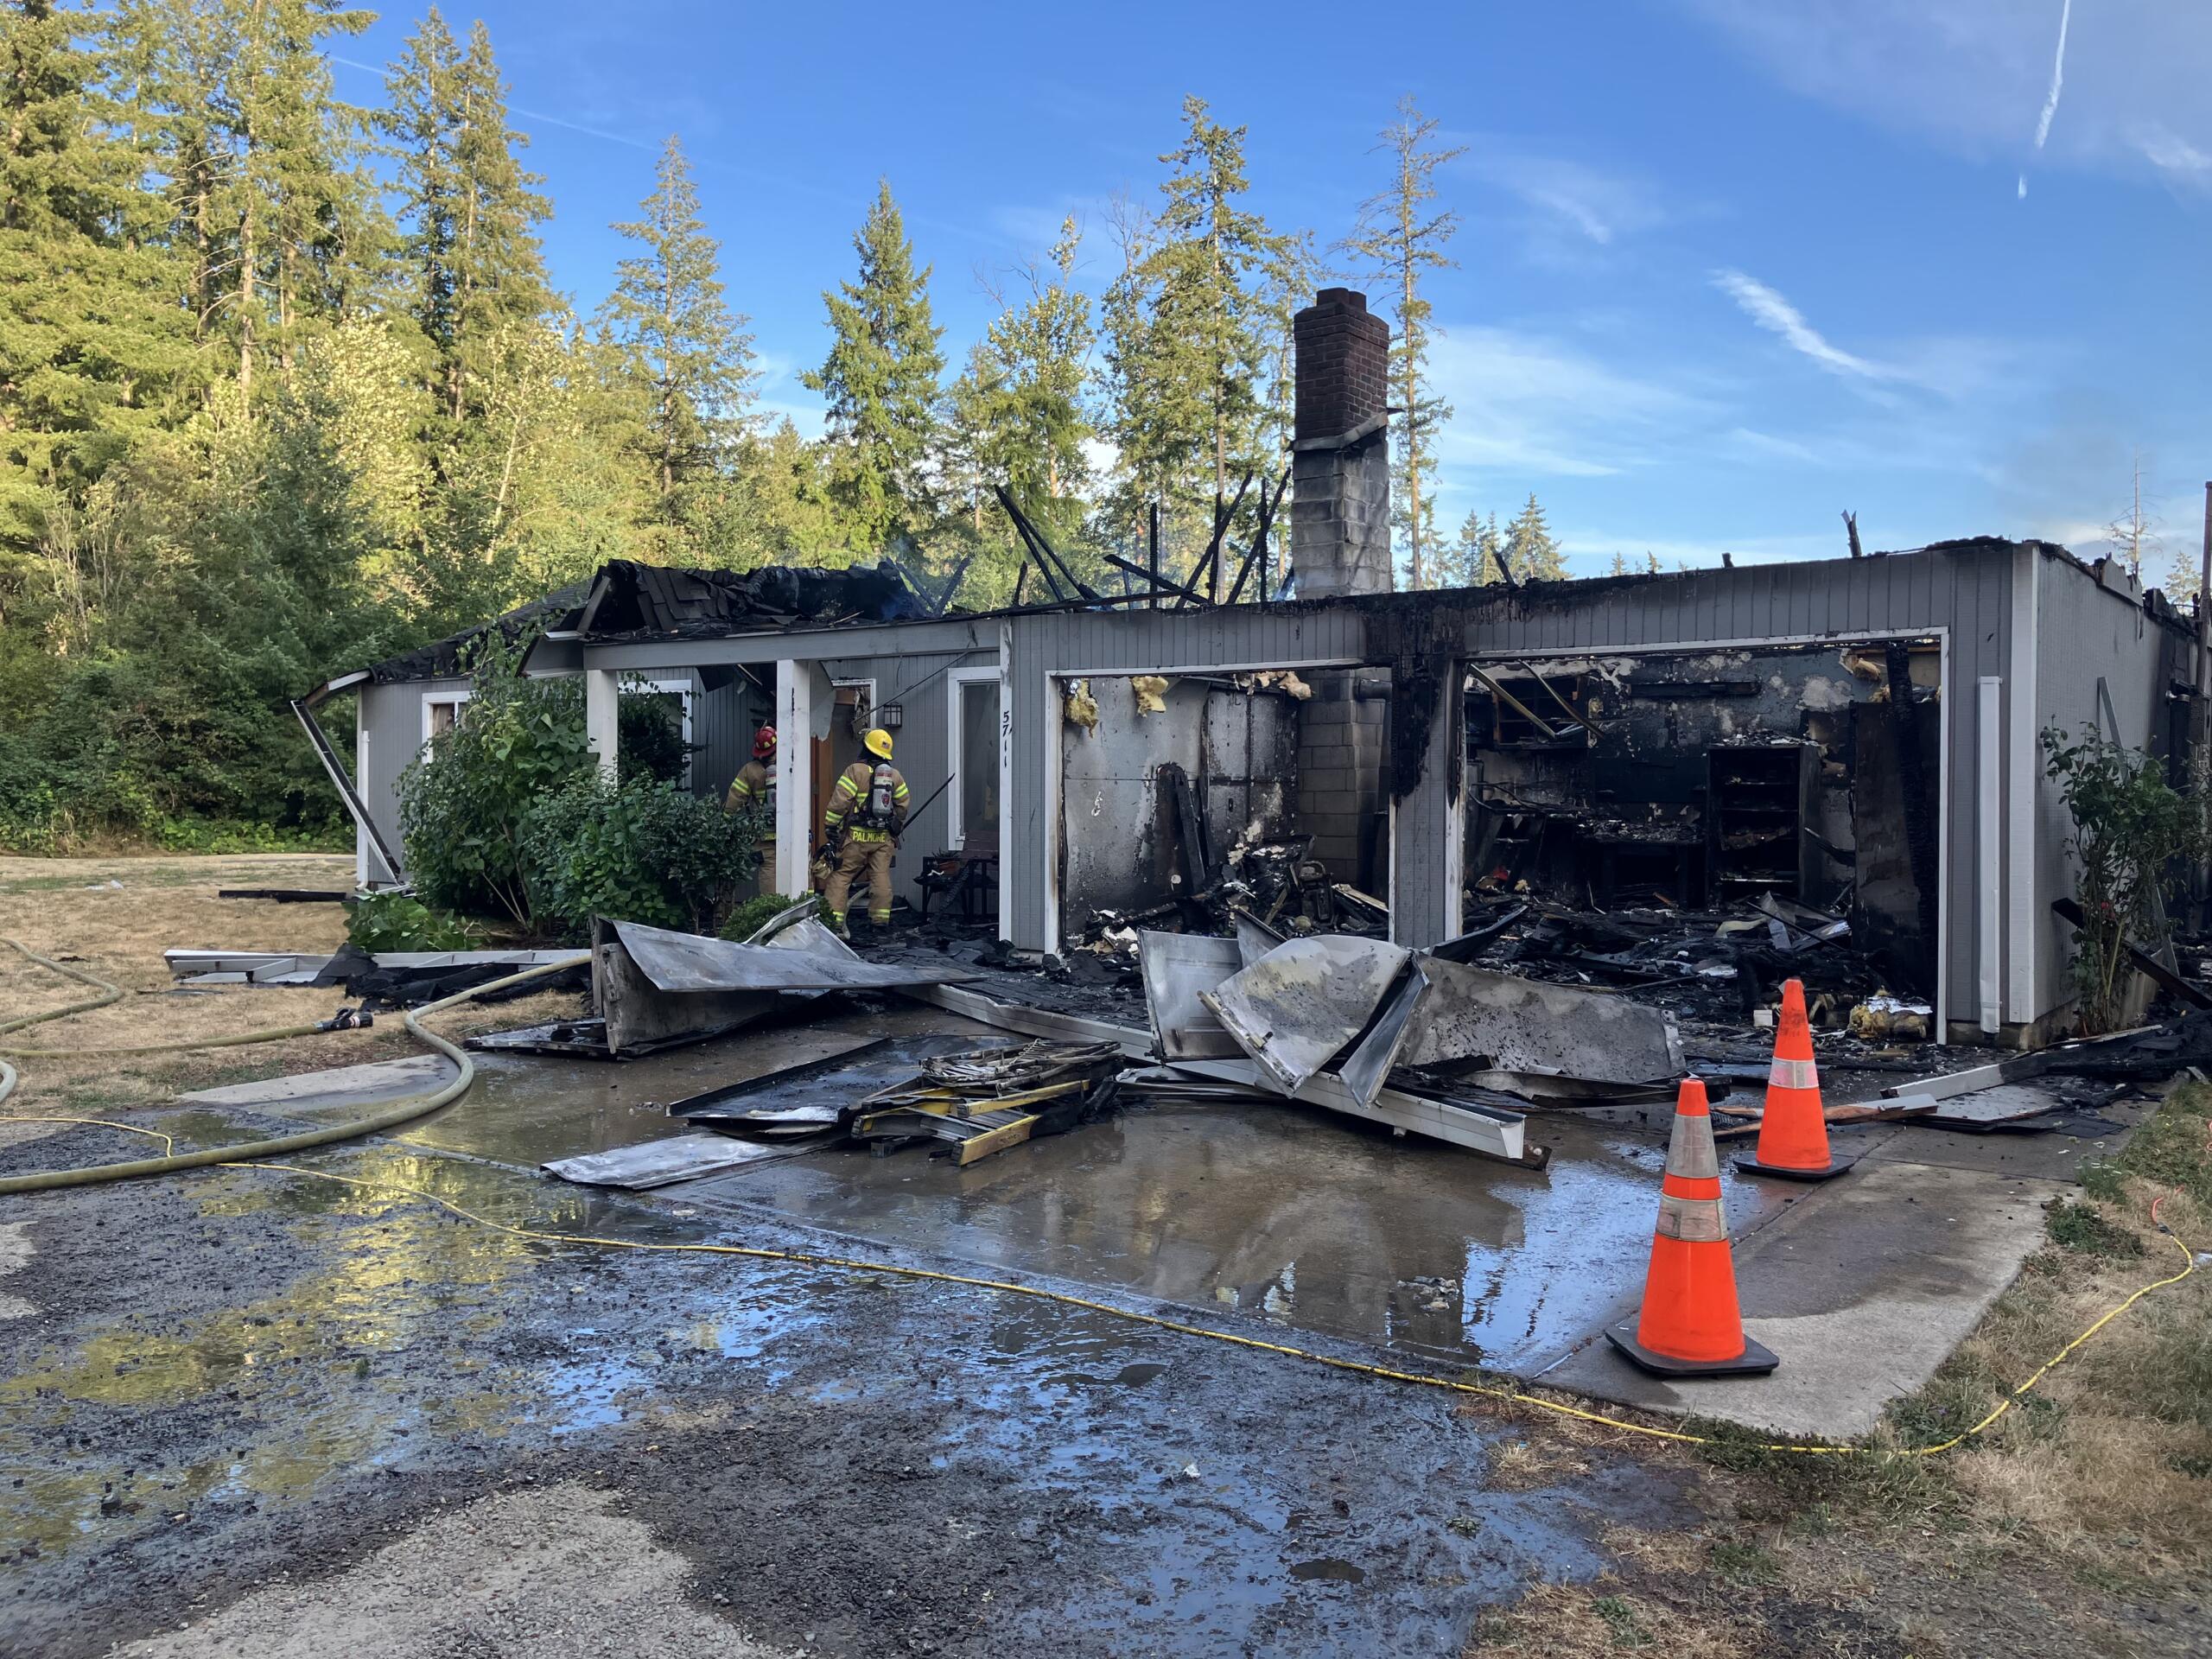 A home in rural Clark County near Ridgefield was destroyed by a fire Saturday. No one was hurt.